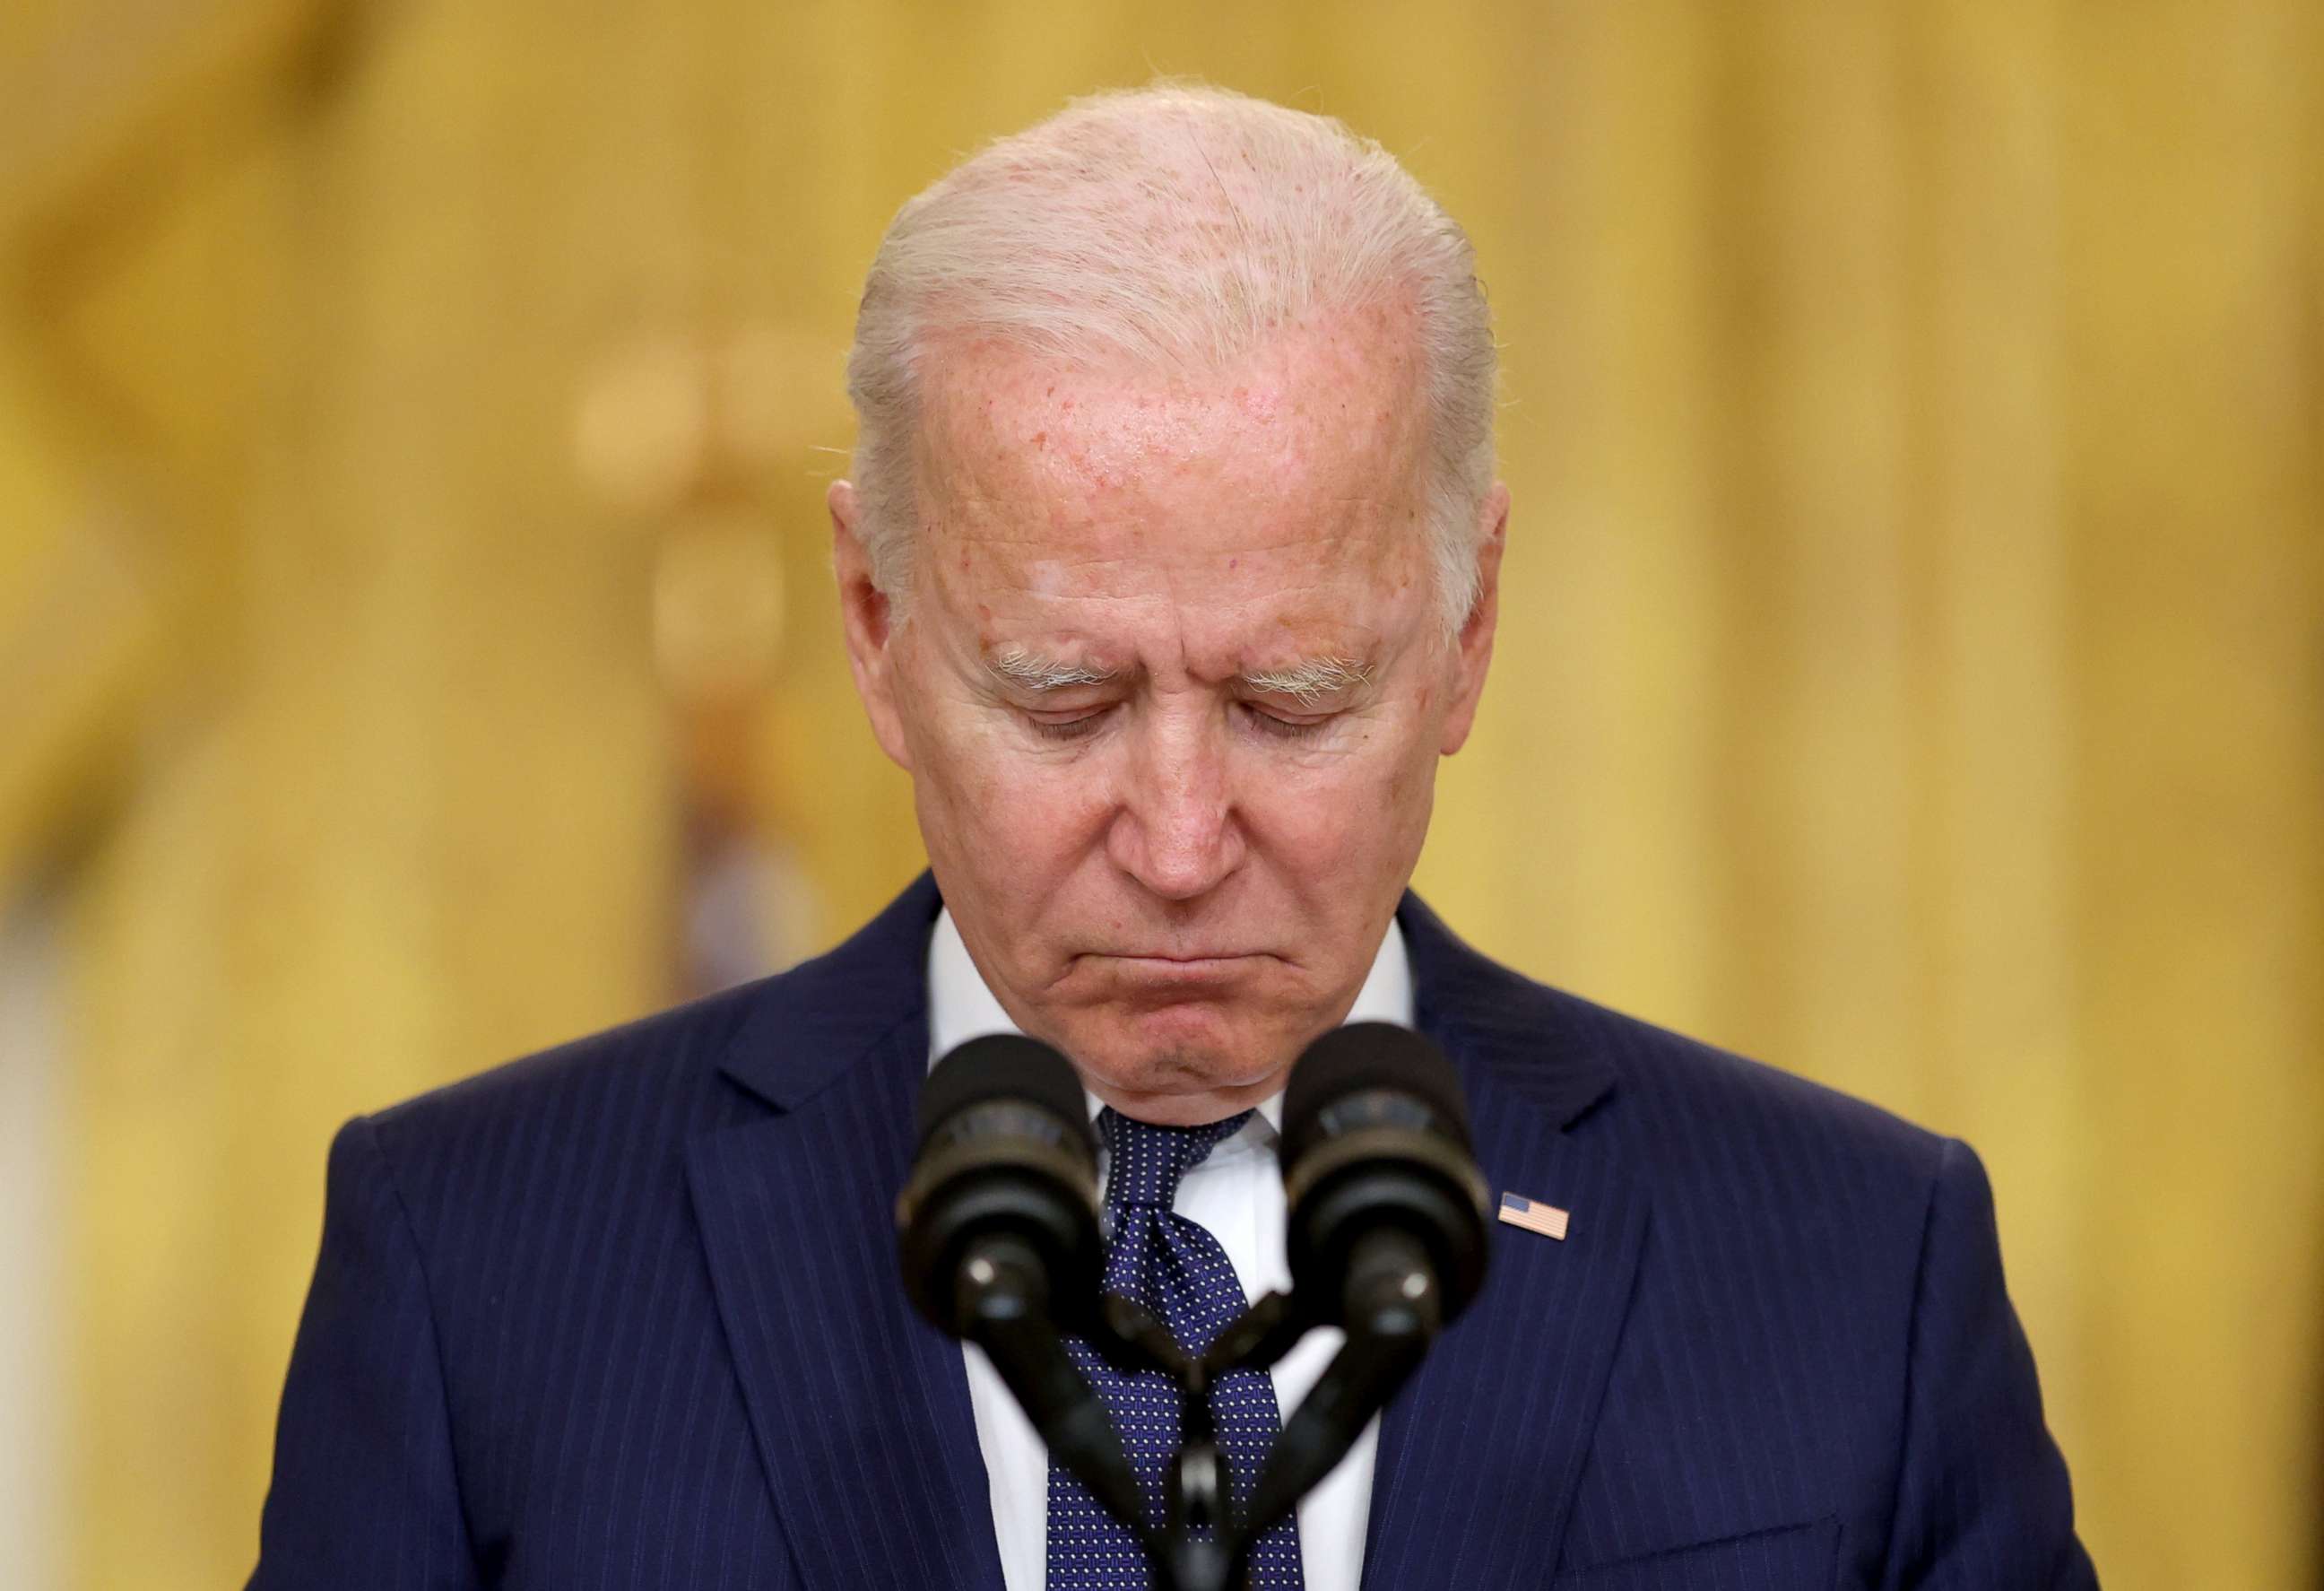 PHOTO: President Joe Biden observes a moment of silence for the dead as he delivers remarks about Afghanistan after a deadly bombing in Kabul, from the East Room of the White House in Washington, Aug. 26, 2021.